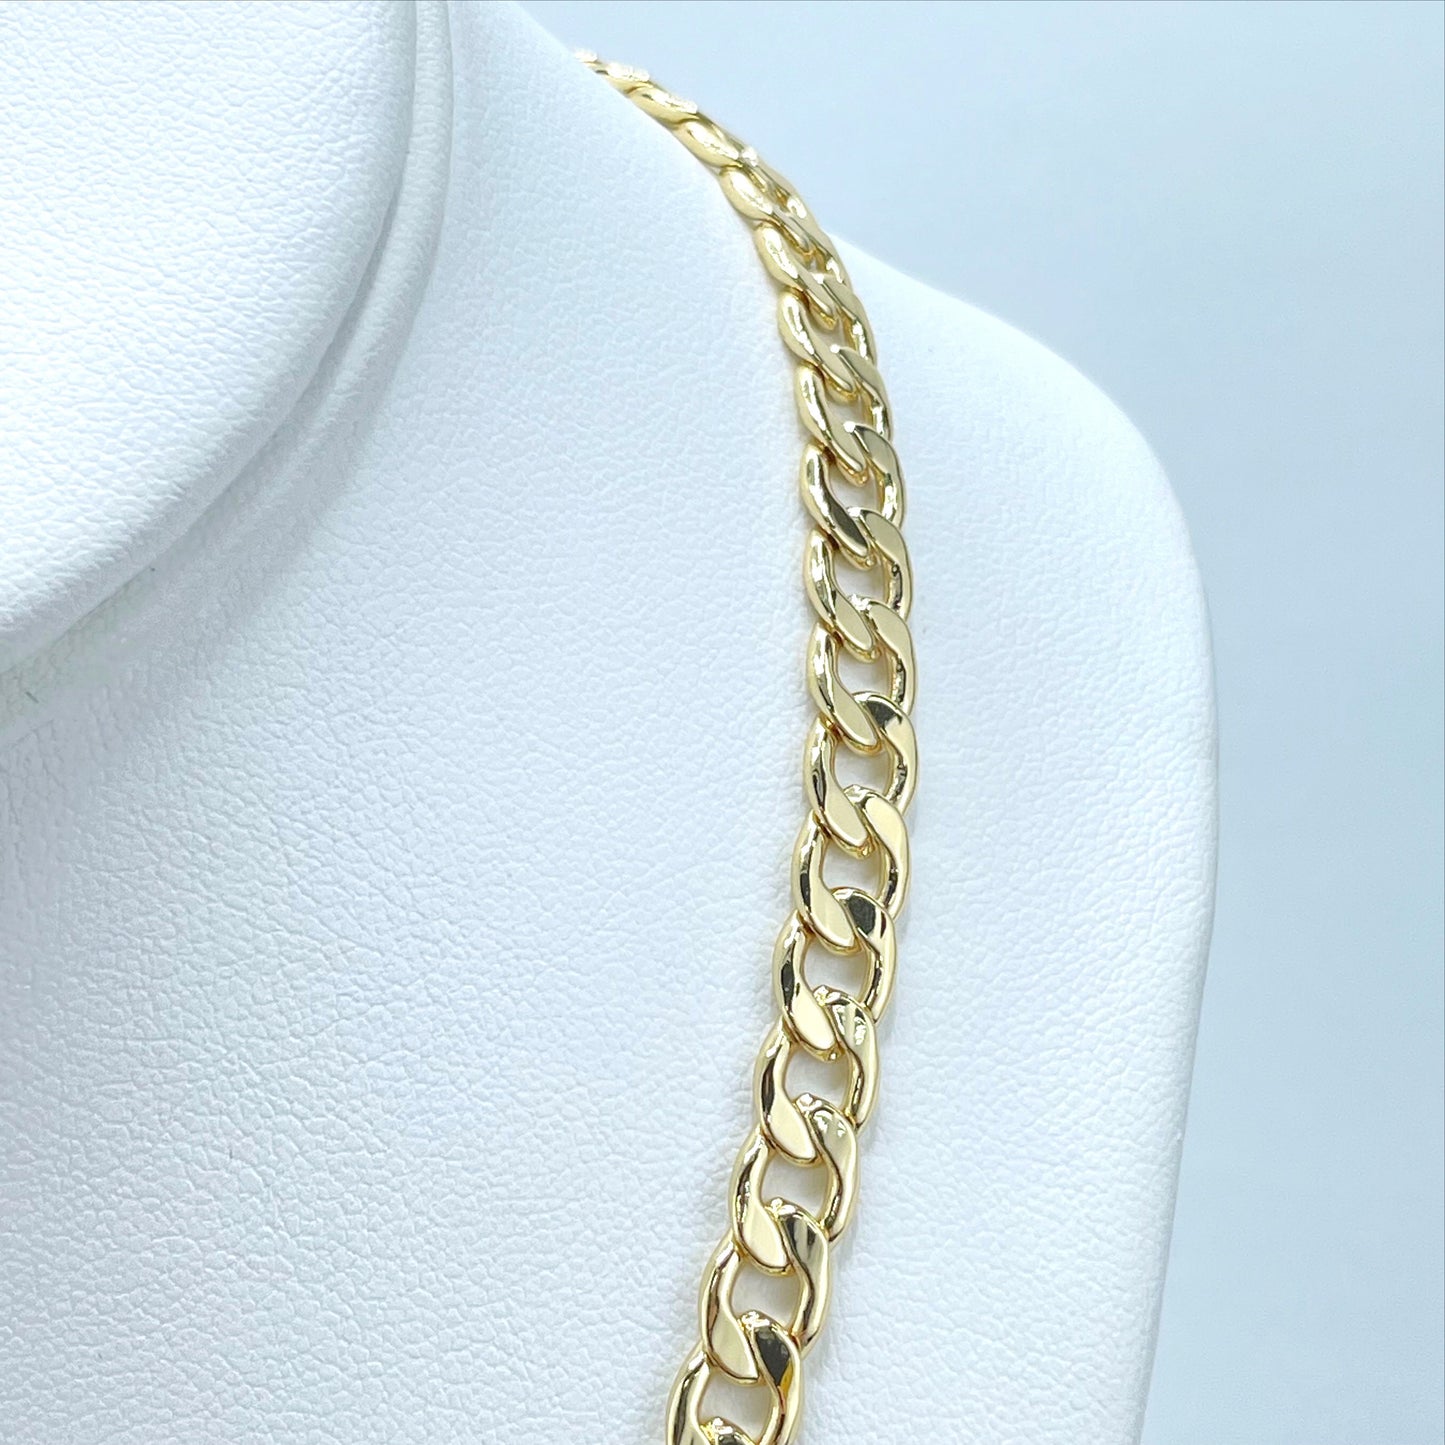 18k Gold Filled Miami Cuban Link Chain 6mm Thickness, 18 or 32 inches of length, Unisex Curb Link Chain, Wholesale Jewelry Making Supplies